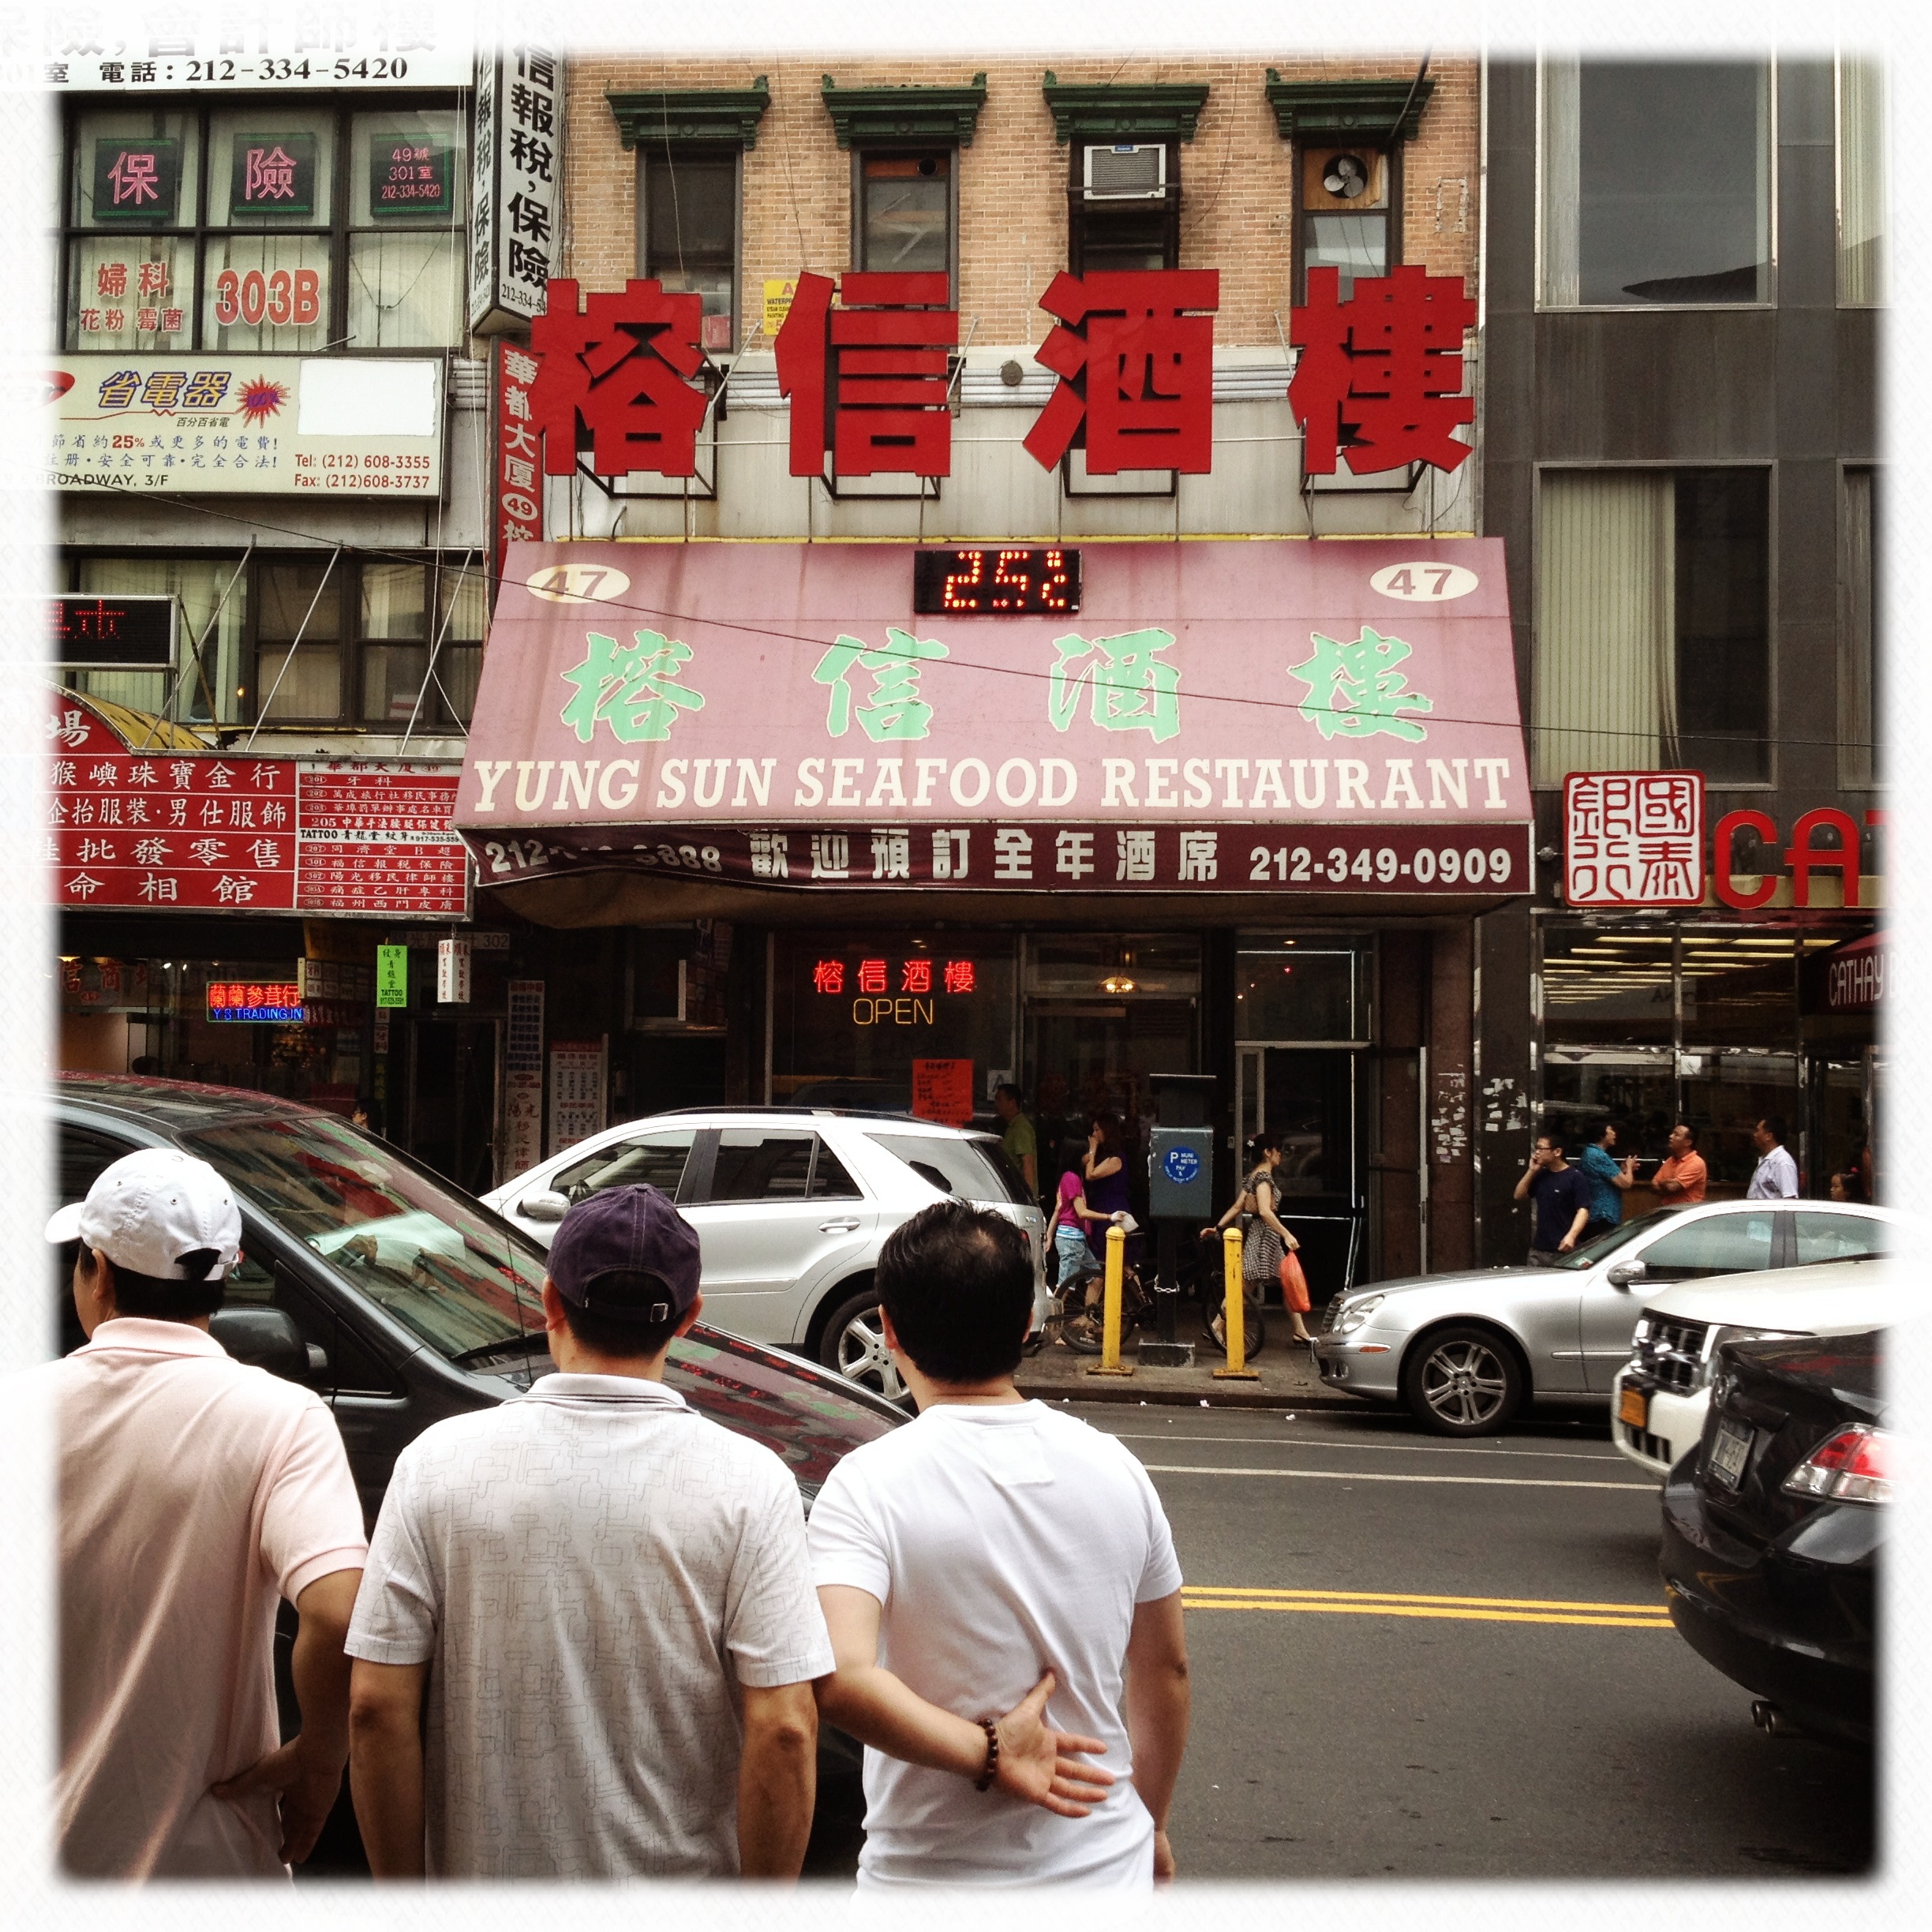 Scenes from Chinatown